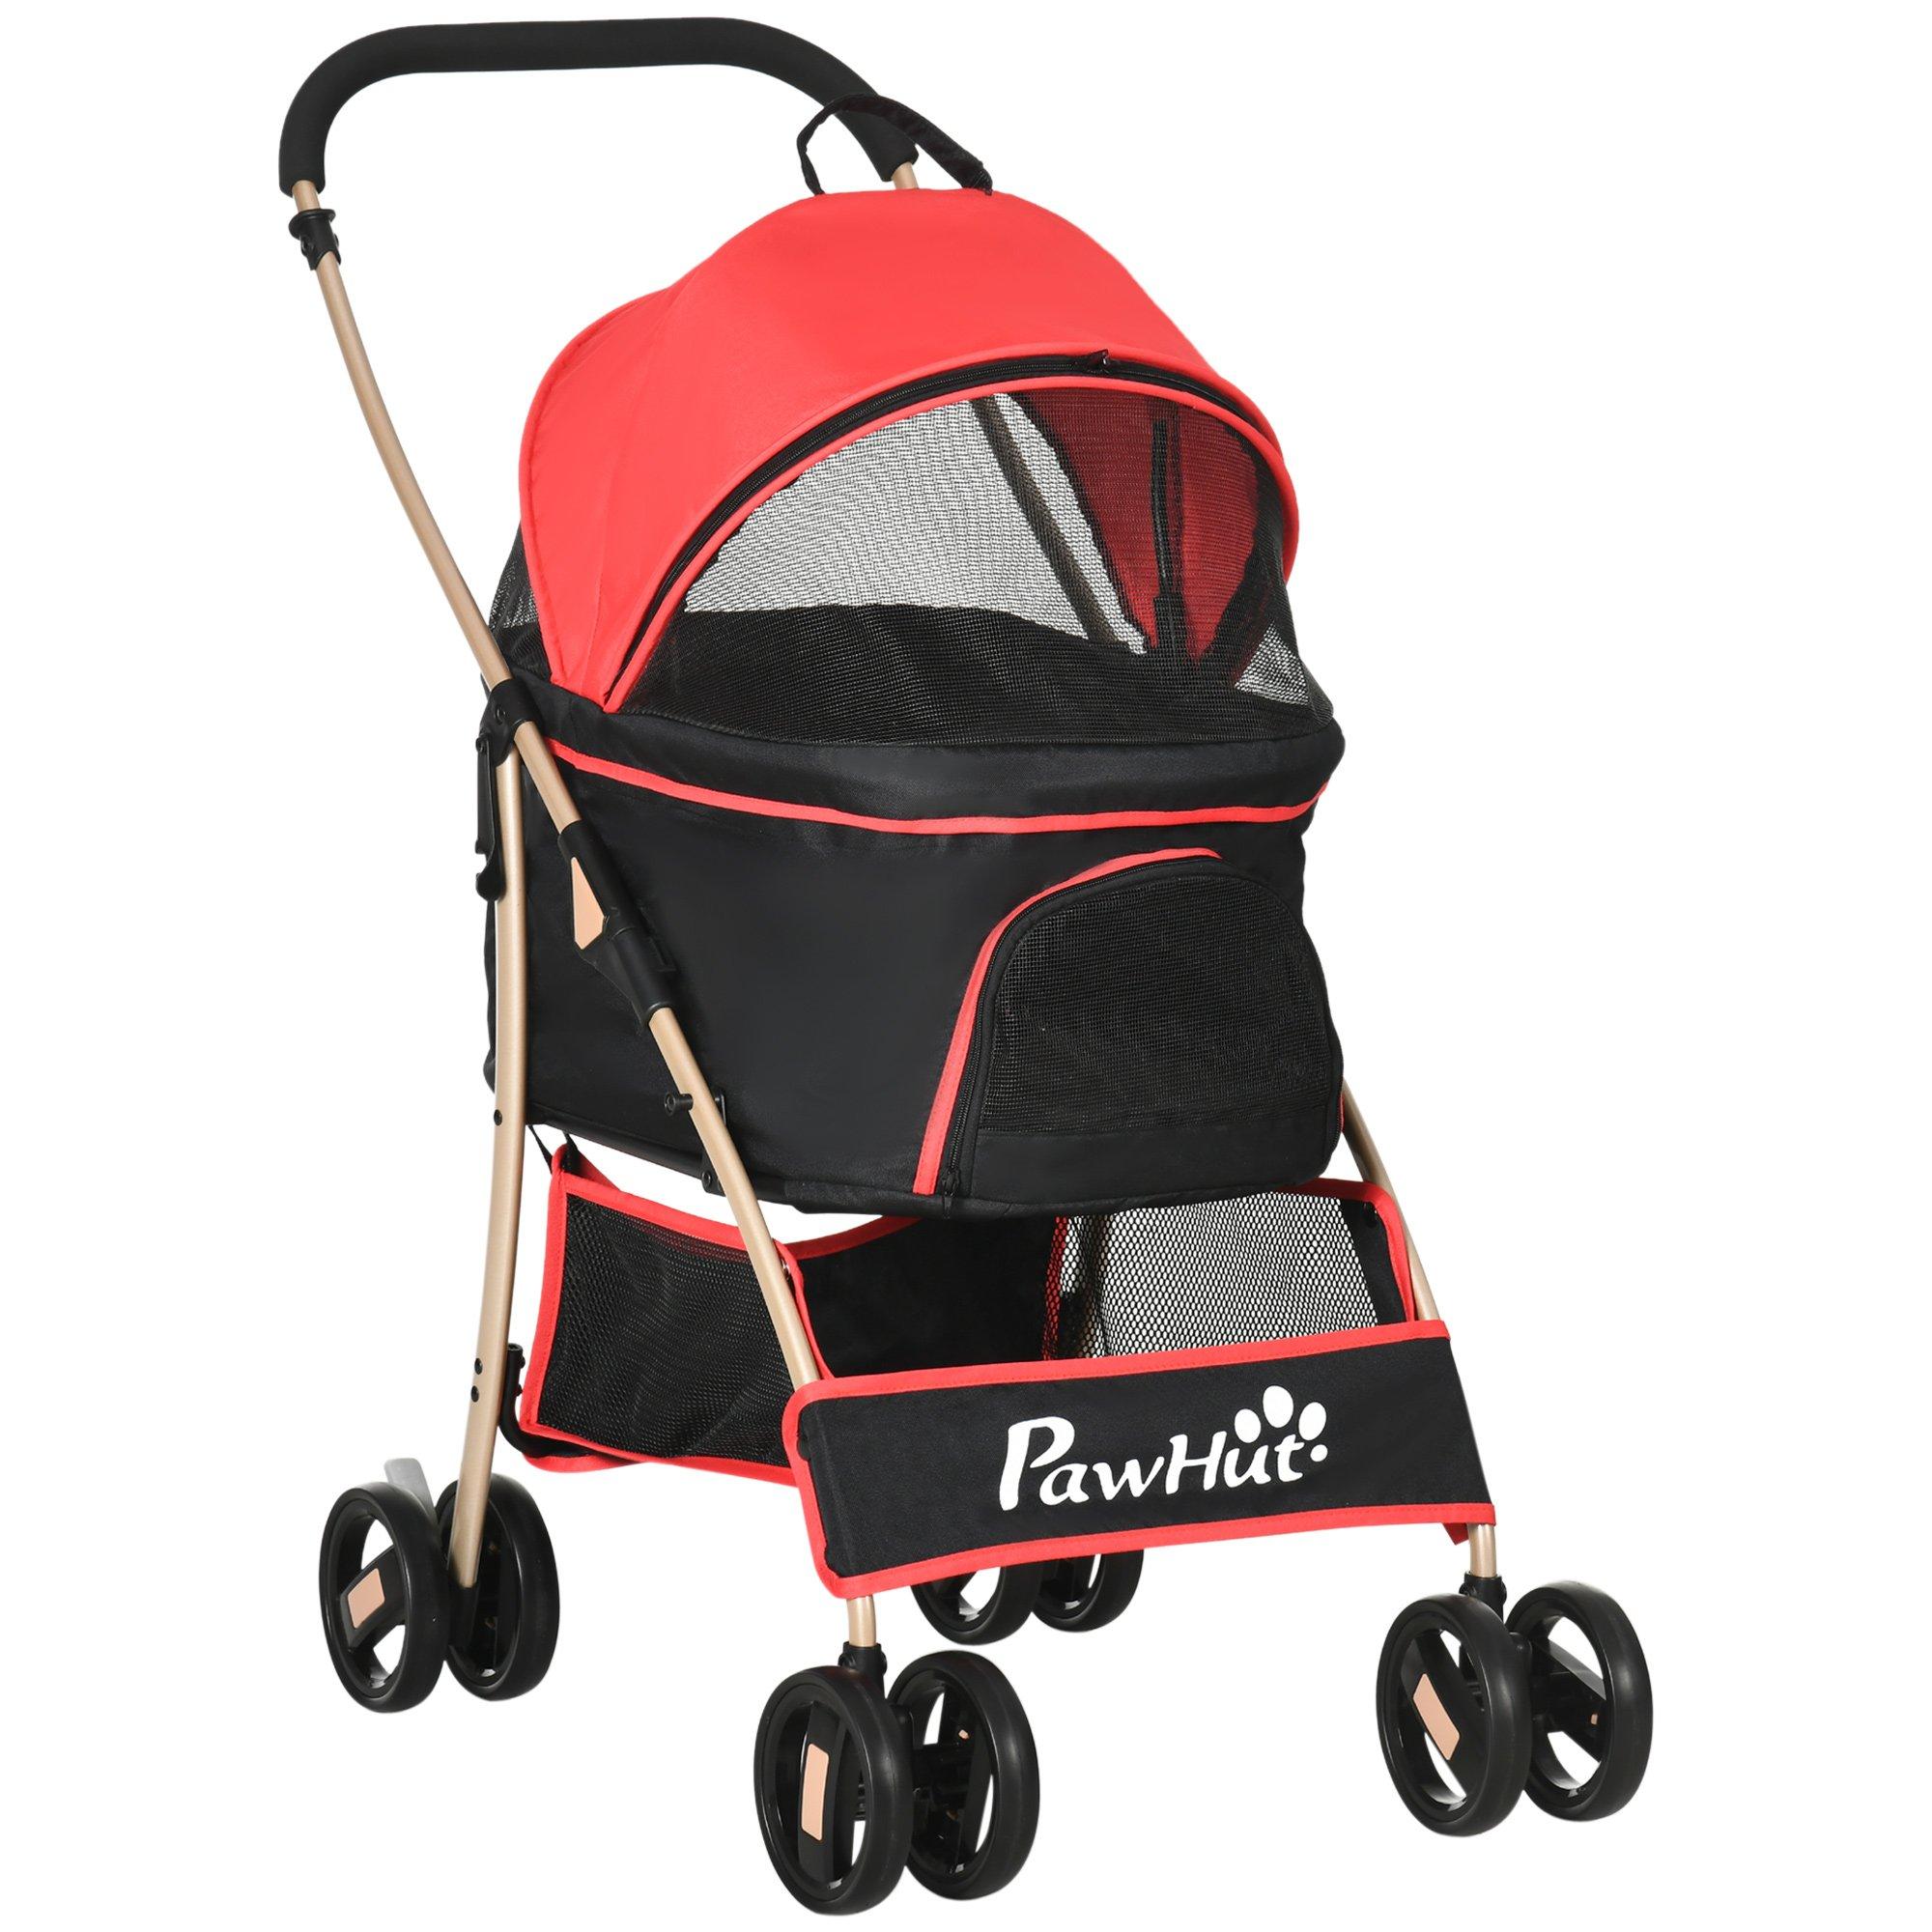 Detachable Pet Stroller, 3 In 1 Dog Cat Travel Carriage, Foldable Carrying Bag with Universal Wheels